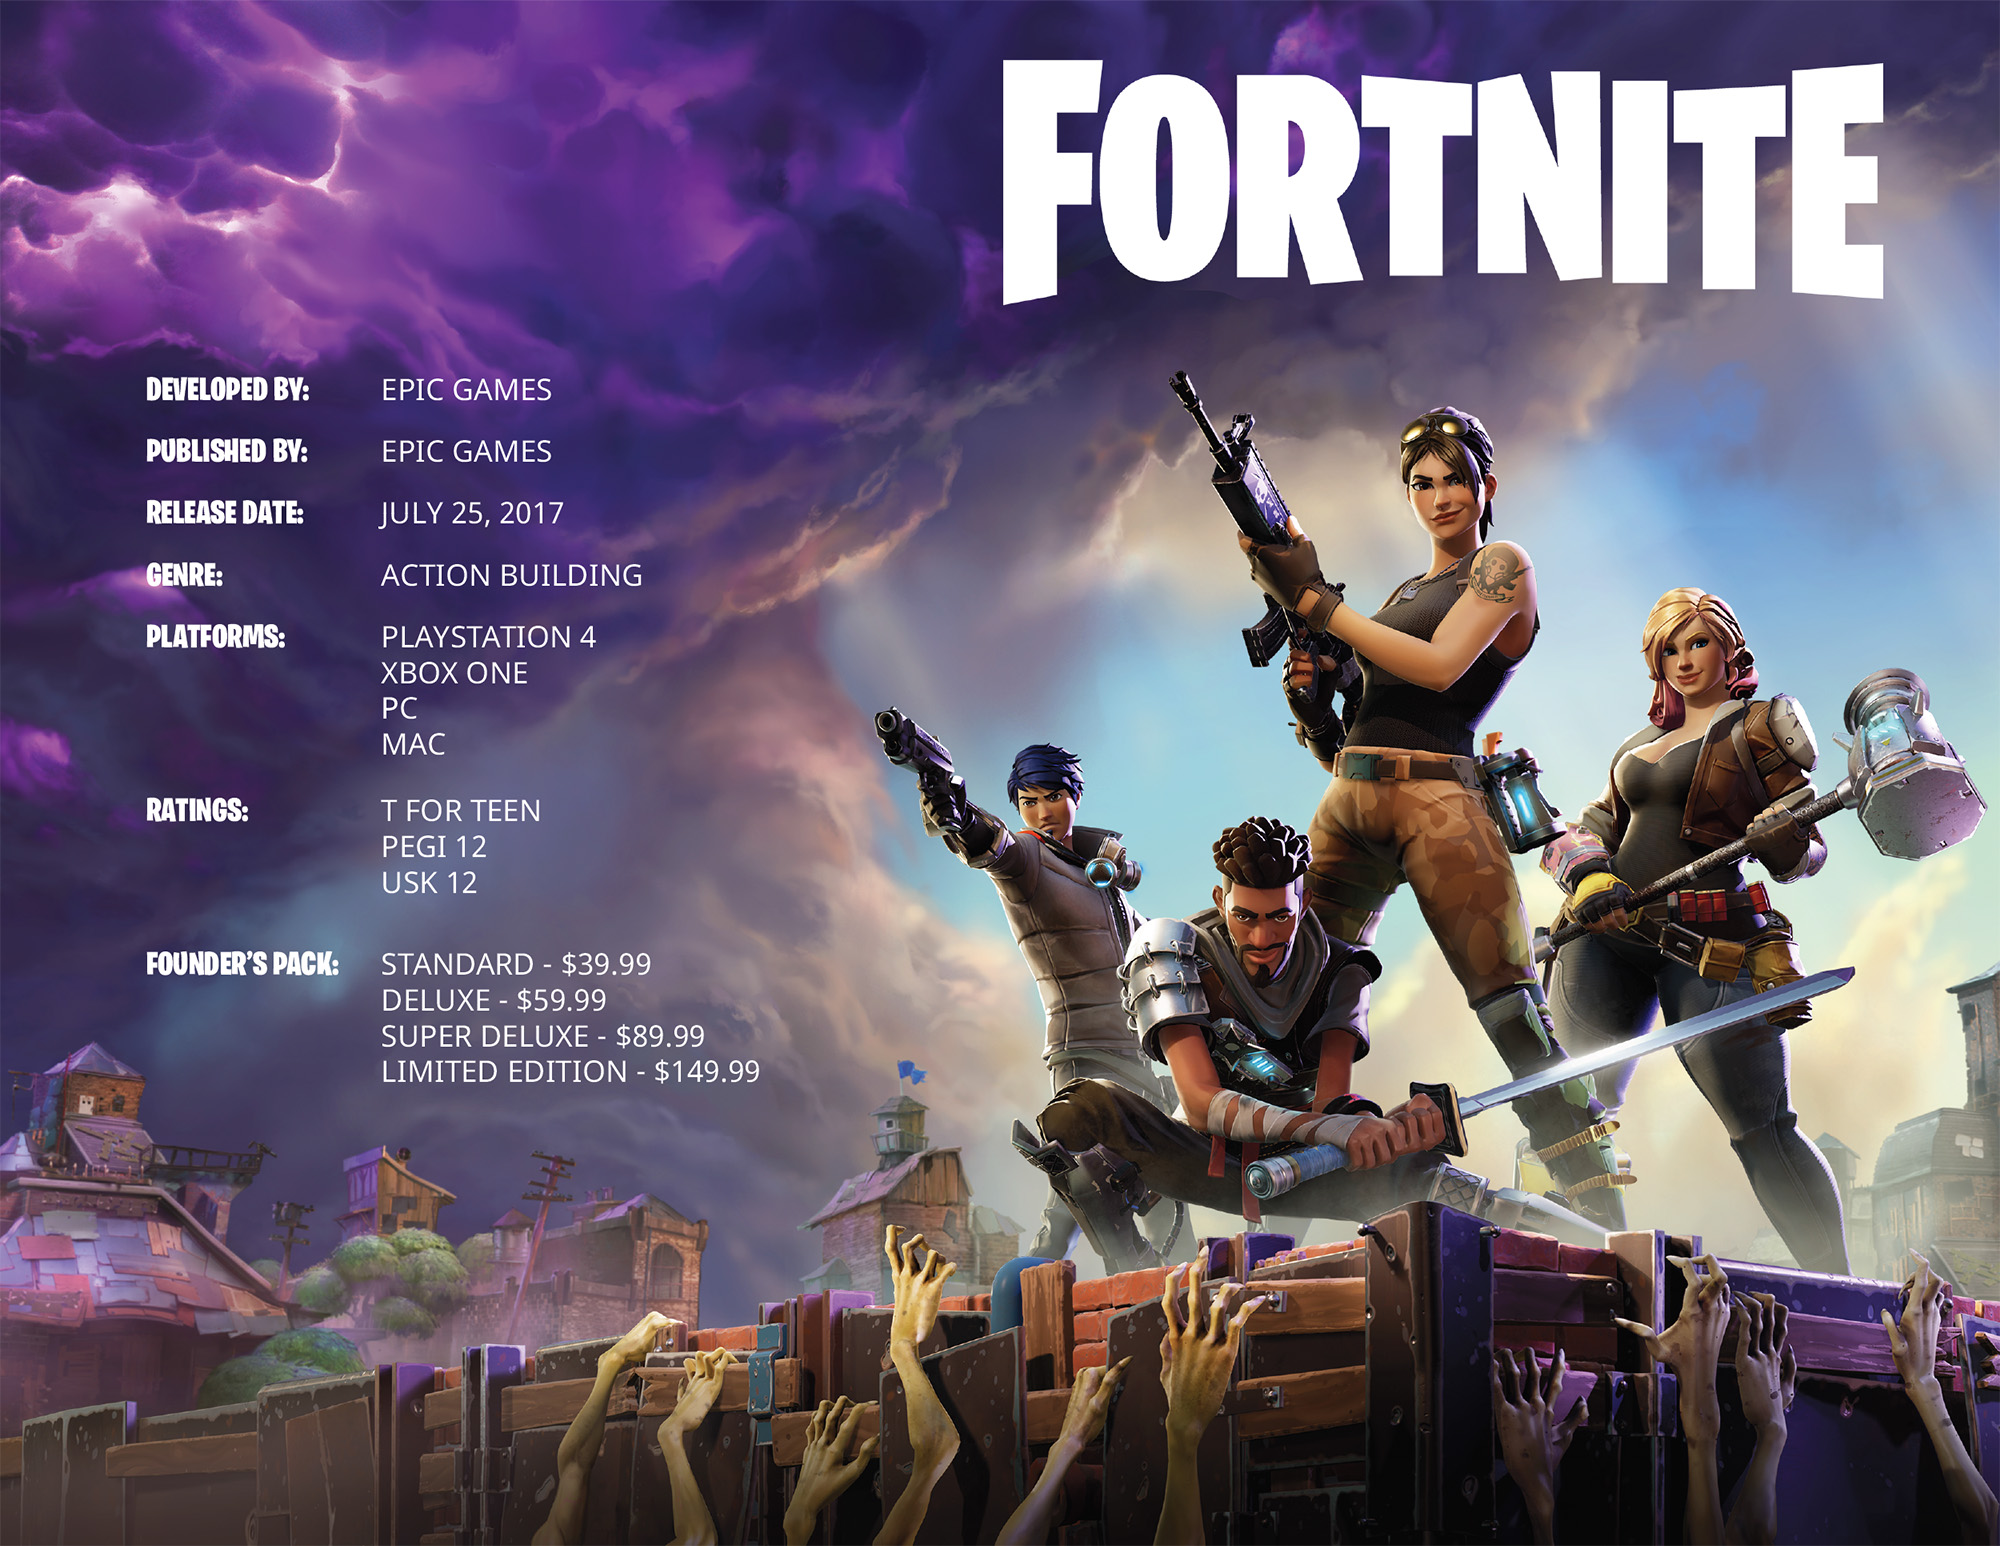 epic also revealed the cast of veteran voice actors lending their talents to help the story of fortnite shine across hundreds of hours of gameplay - fortnite la horde